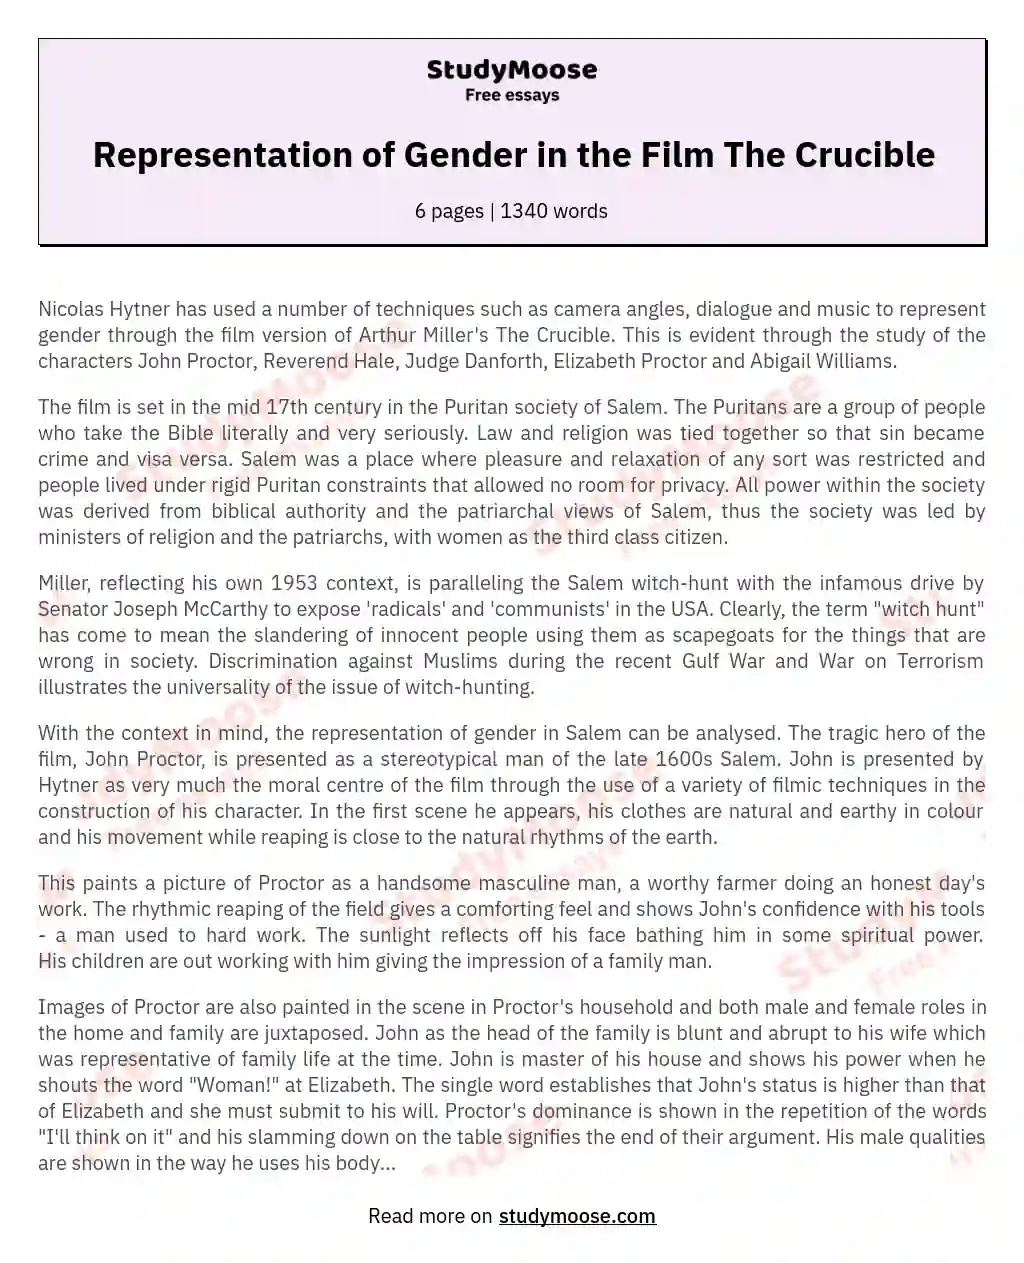 Representation of Gender in 'The Crucible' essay